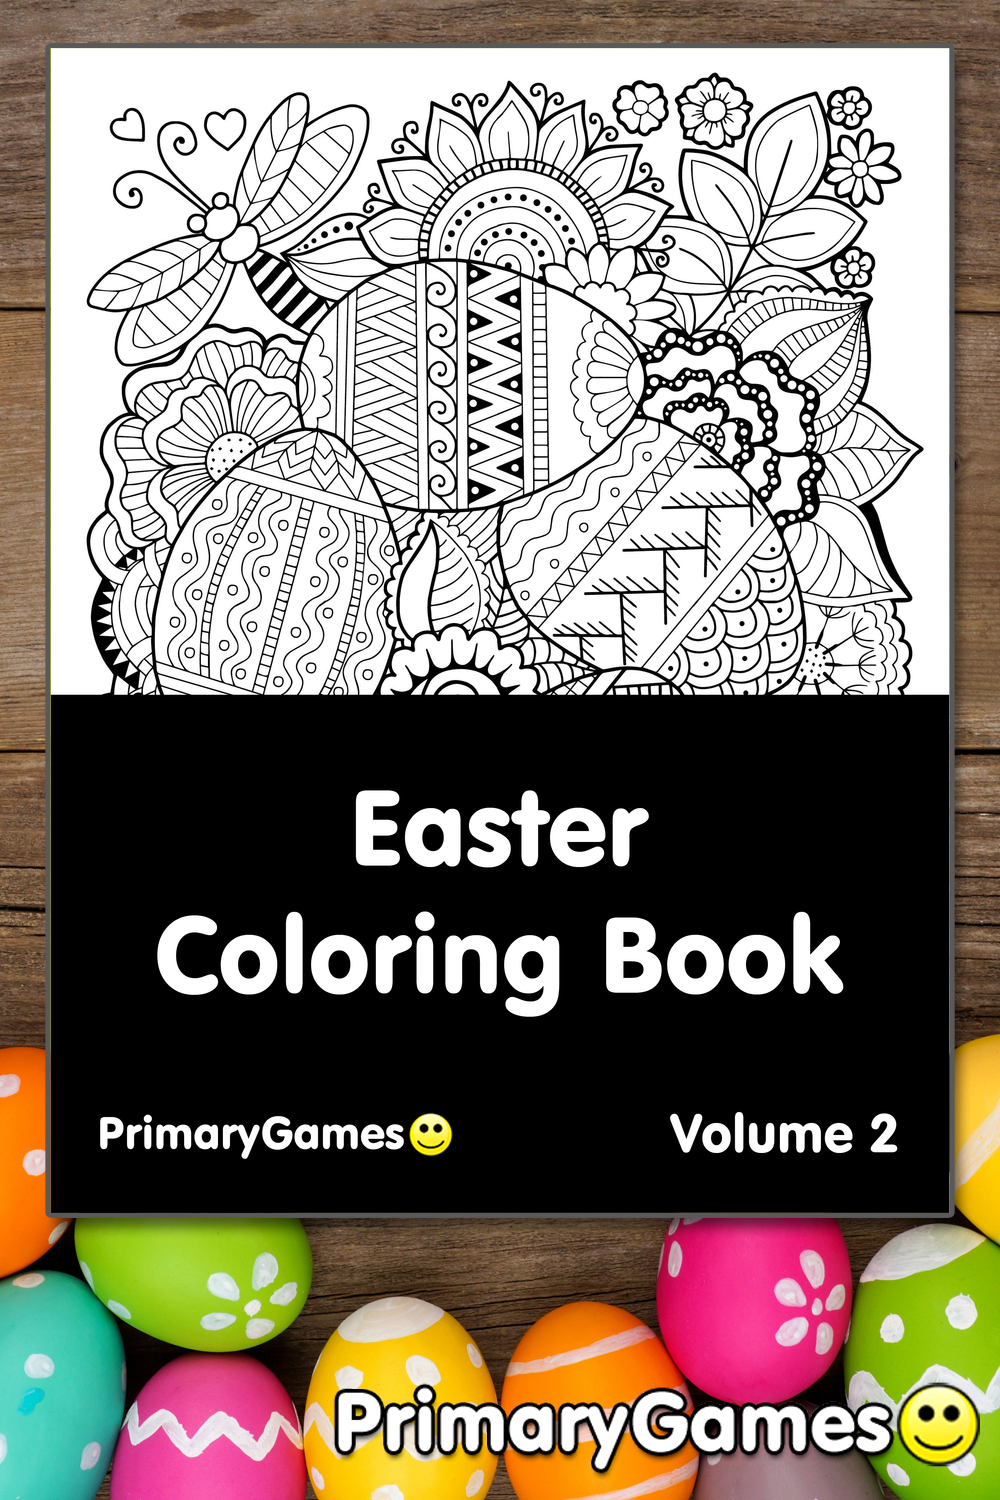 10+ free printable spring coloring pages for adults pdf Coloring rabbit pattern doodle bunny easter adult adults mandala animals ethnic vector colouring shutterstock animal drawing floral printable mandalas bunnies